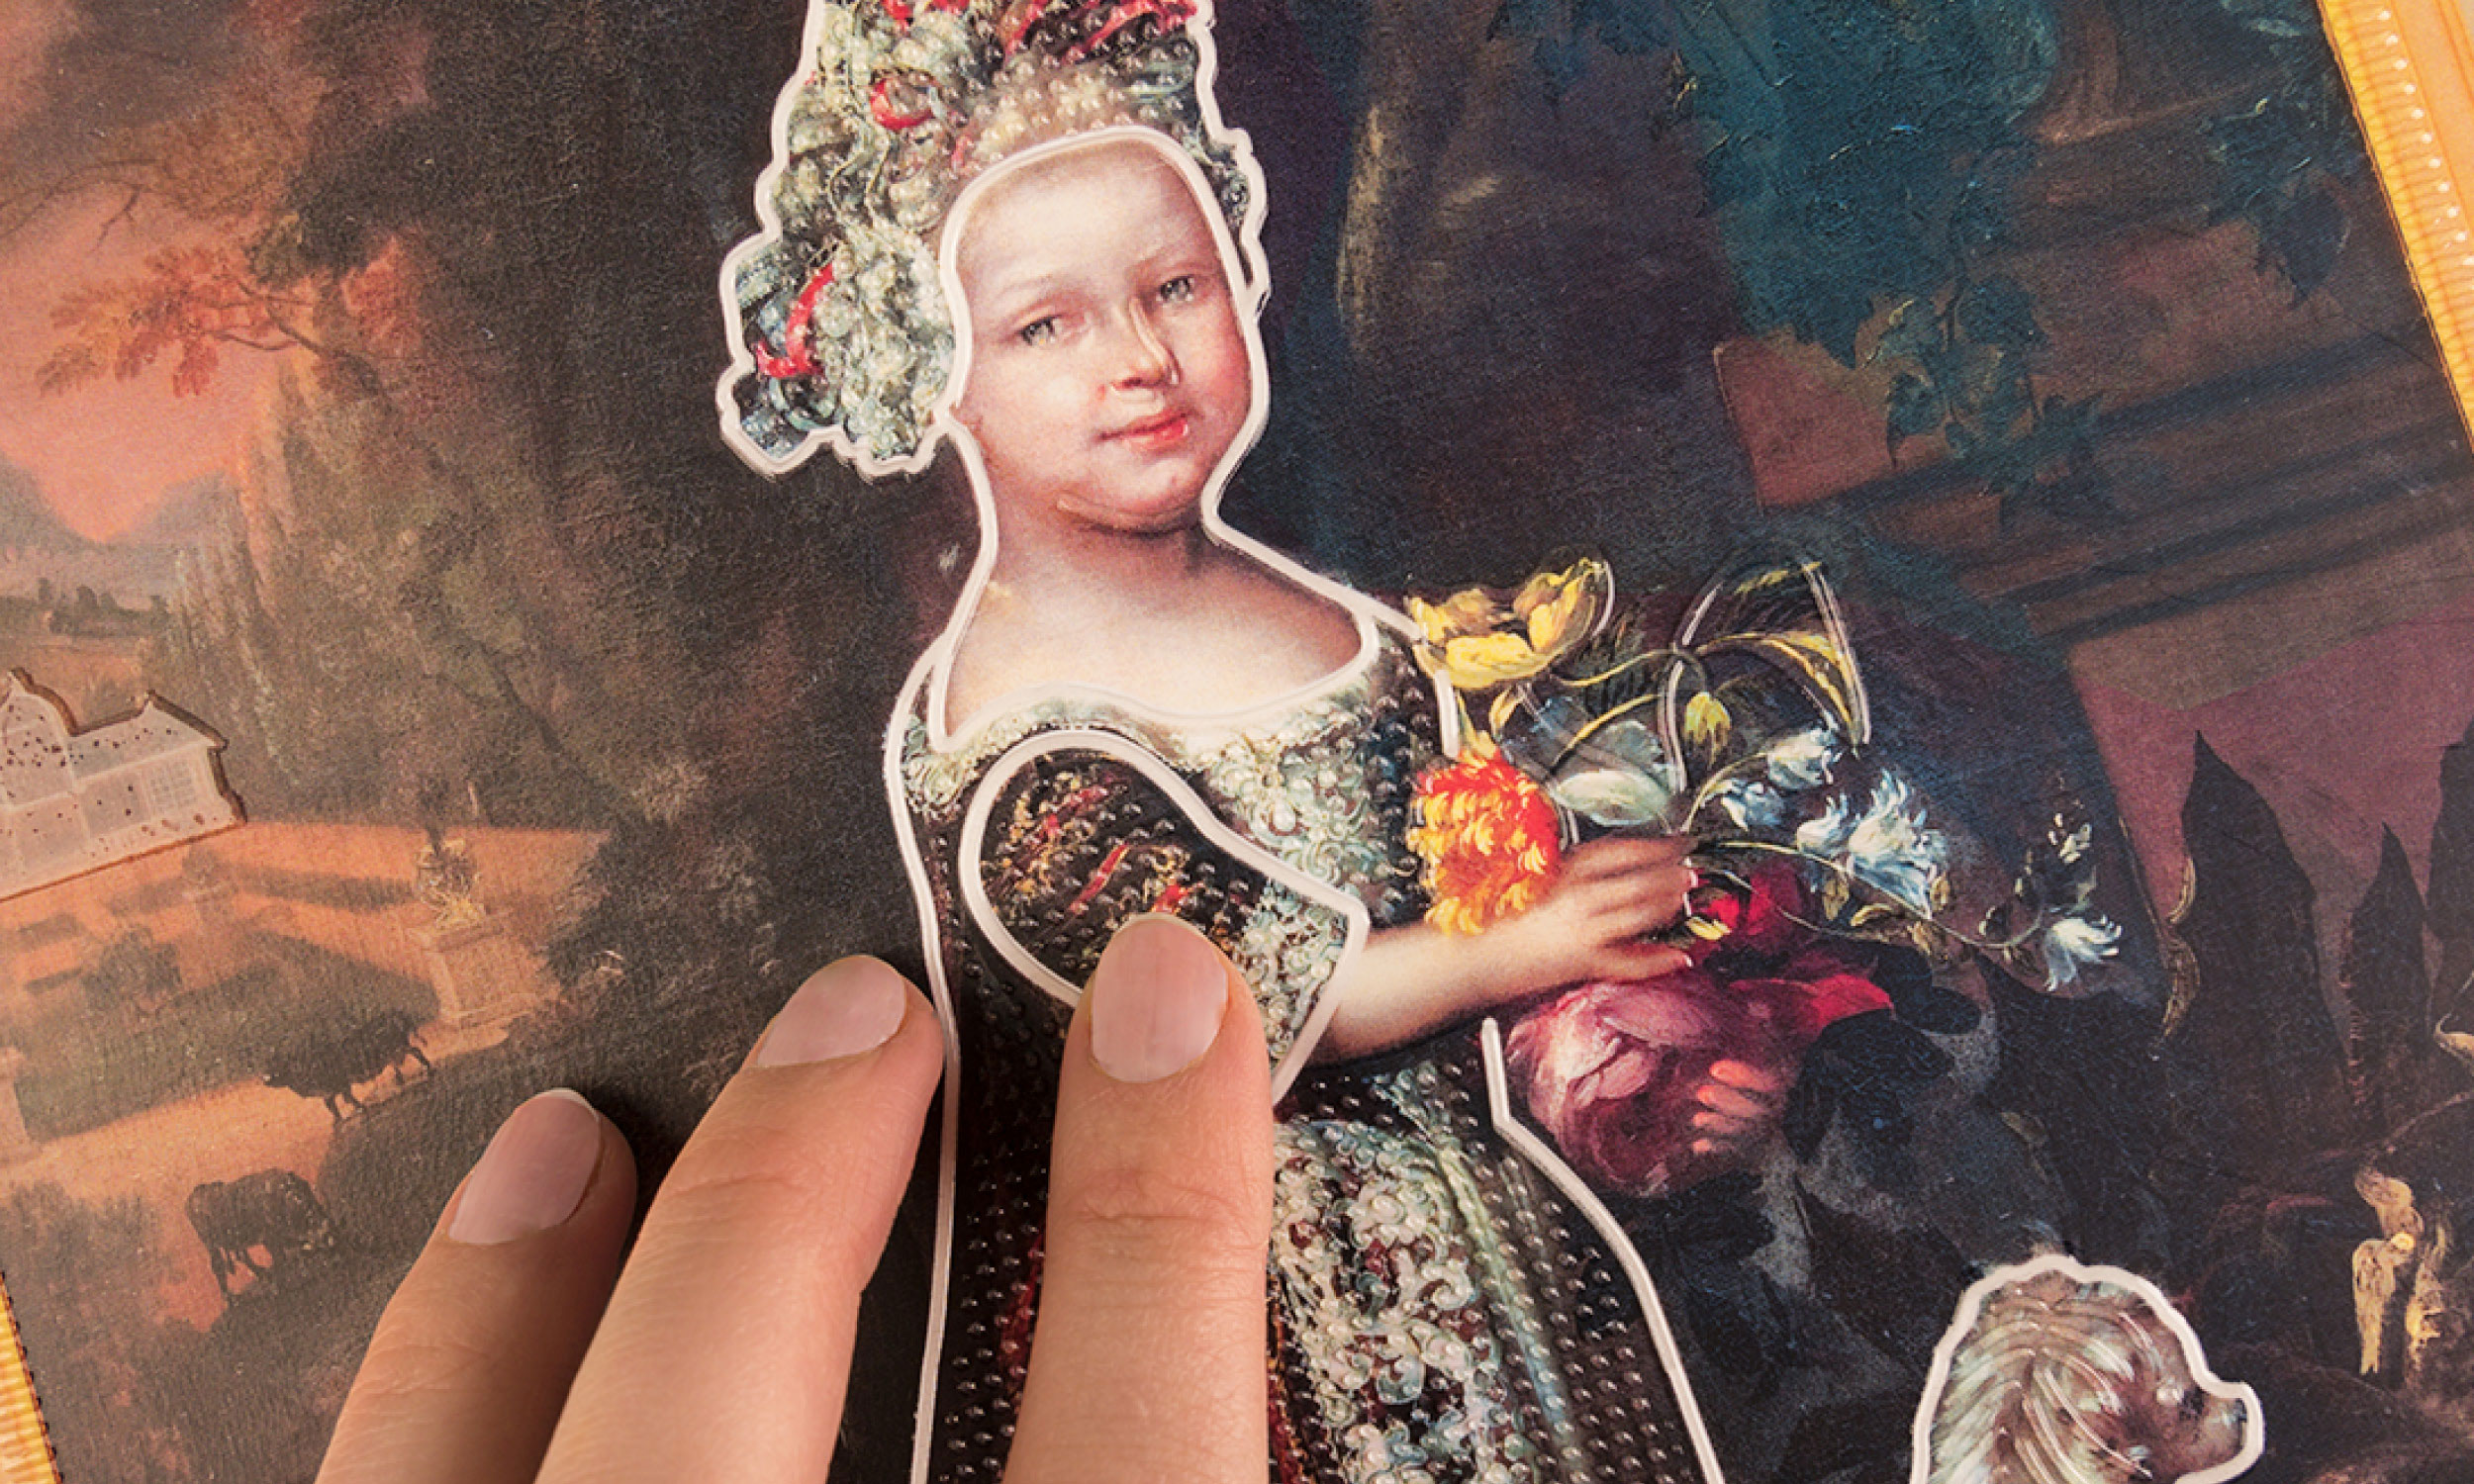 Photo with detail of the "Little Princess", on which one hand feels the outline of the princess